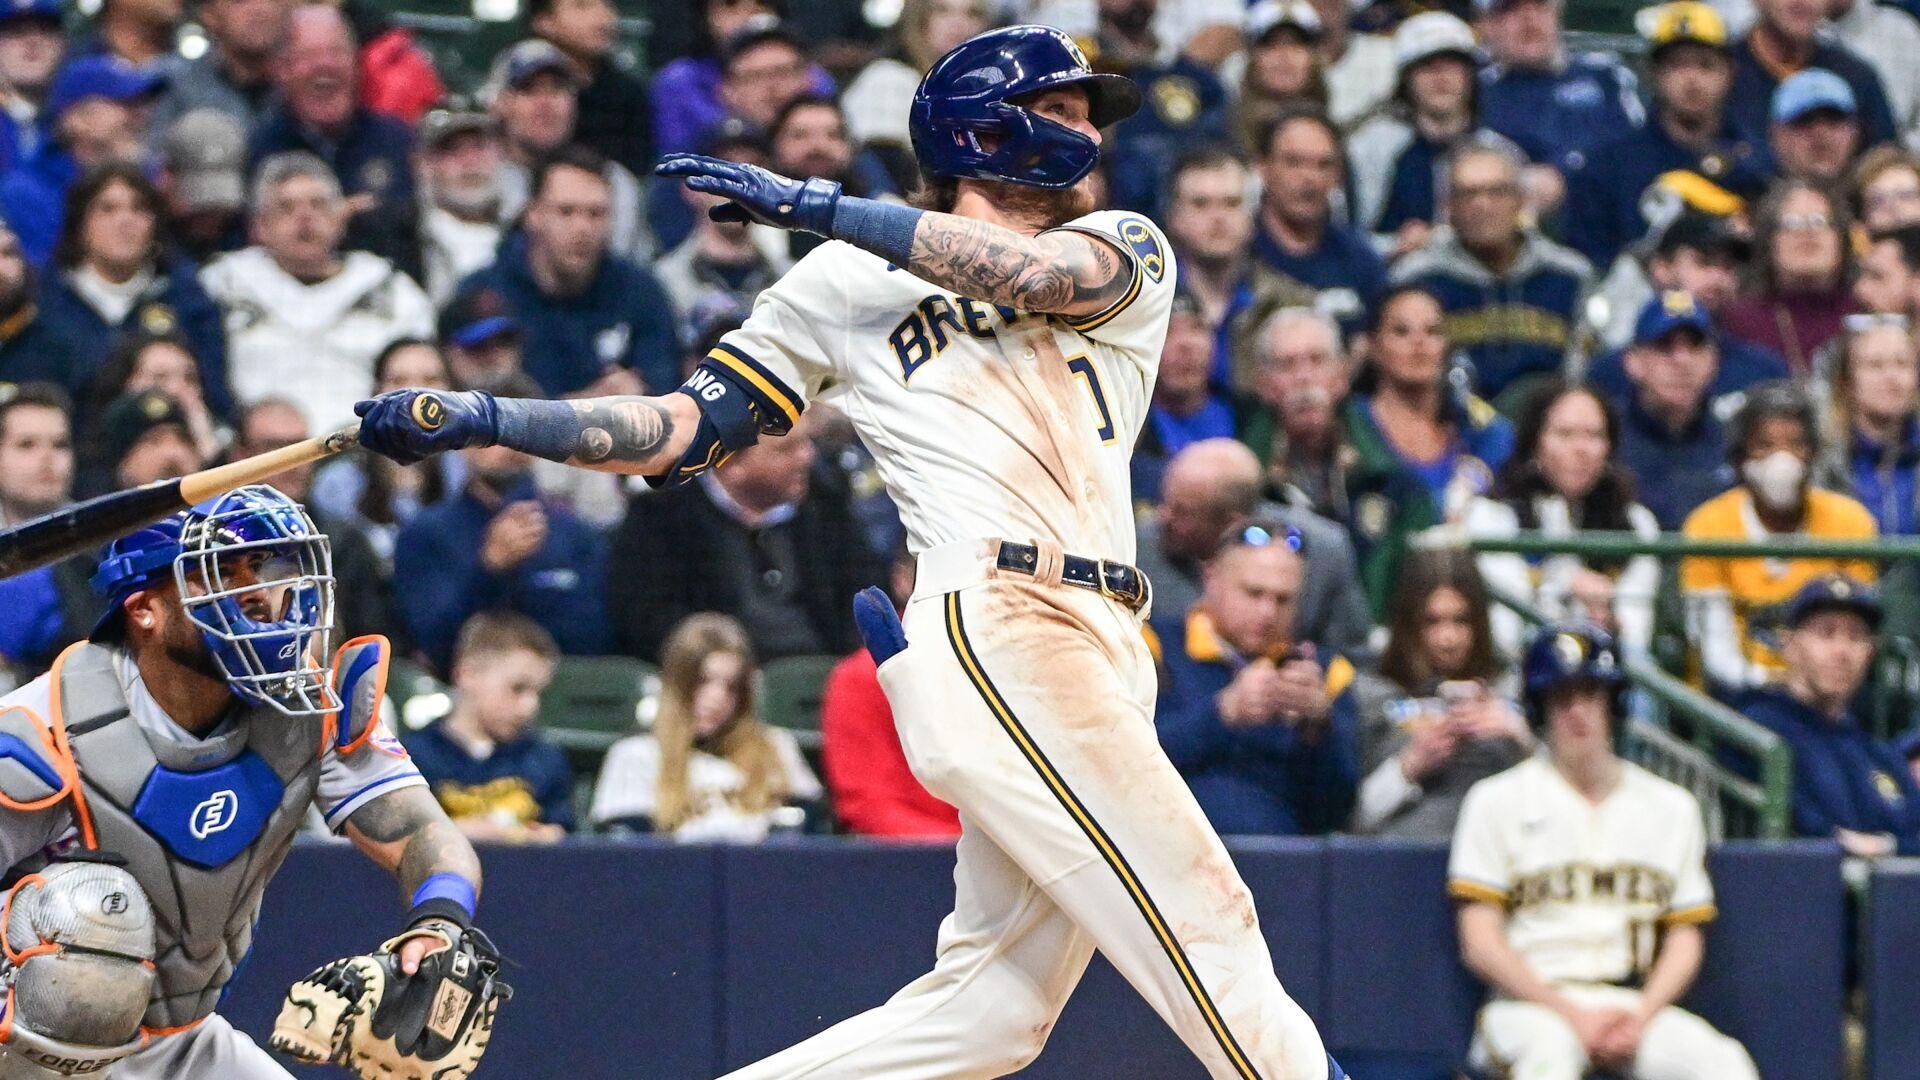 Milwaukee Brewers' Garrett Mitchell celebrates after hitting a home run  during the sixth inning of a baseball game against the New York Mets  Tuesday, April 4, 2023, in Milwaukee. (AP Photo/Morry Gash